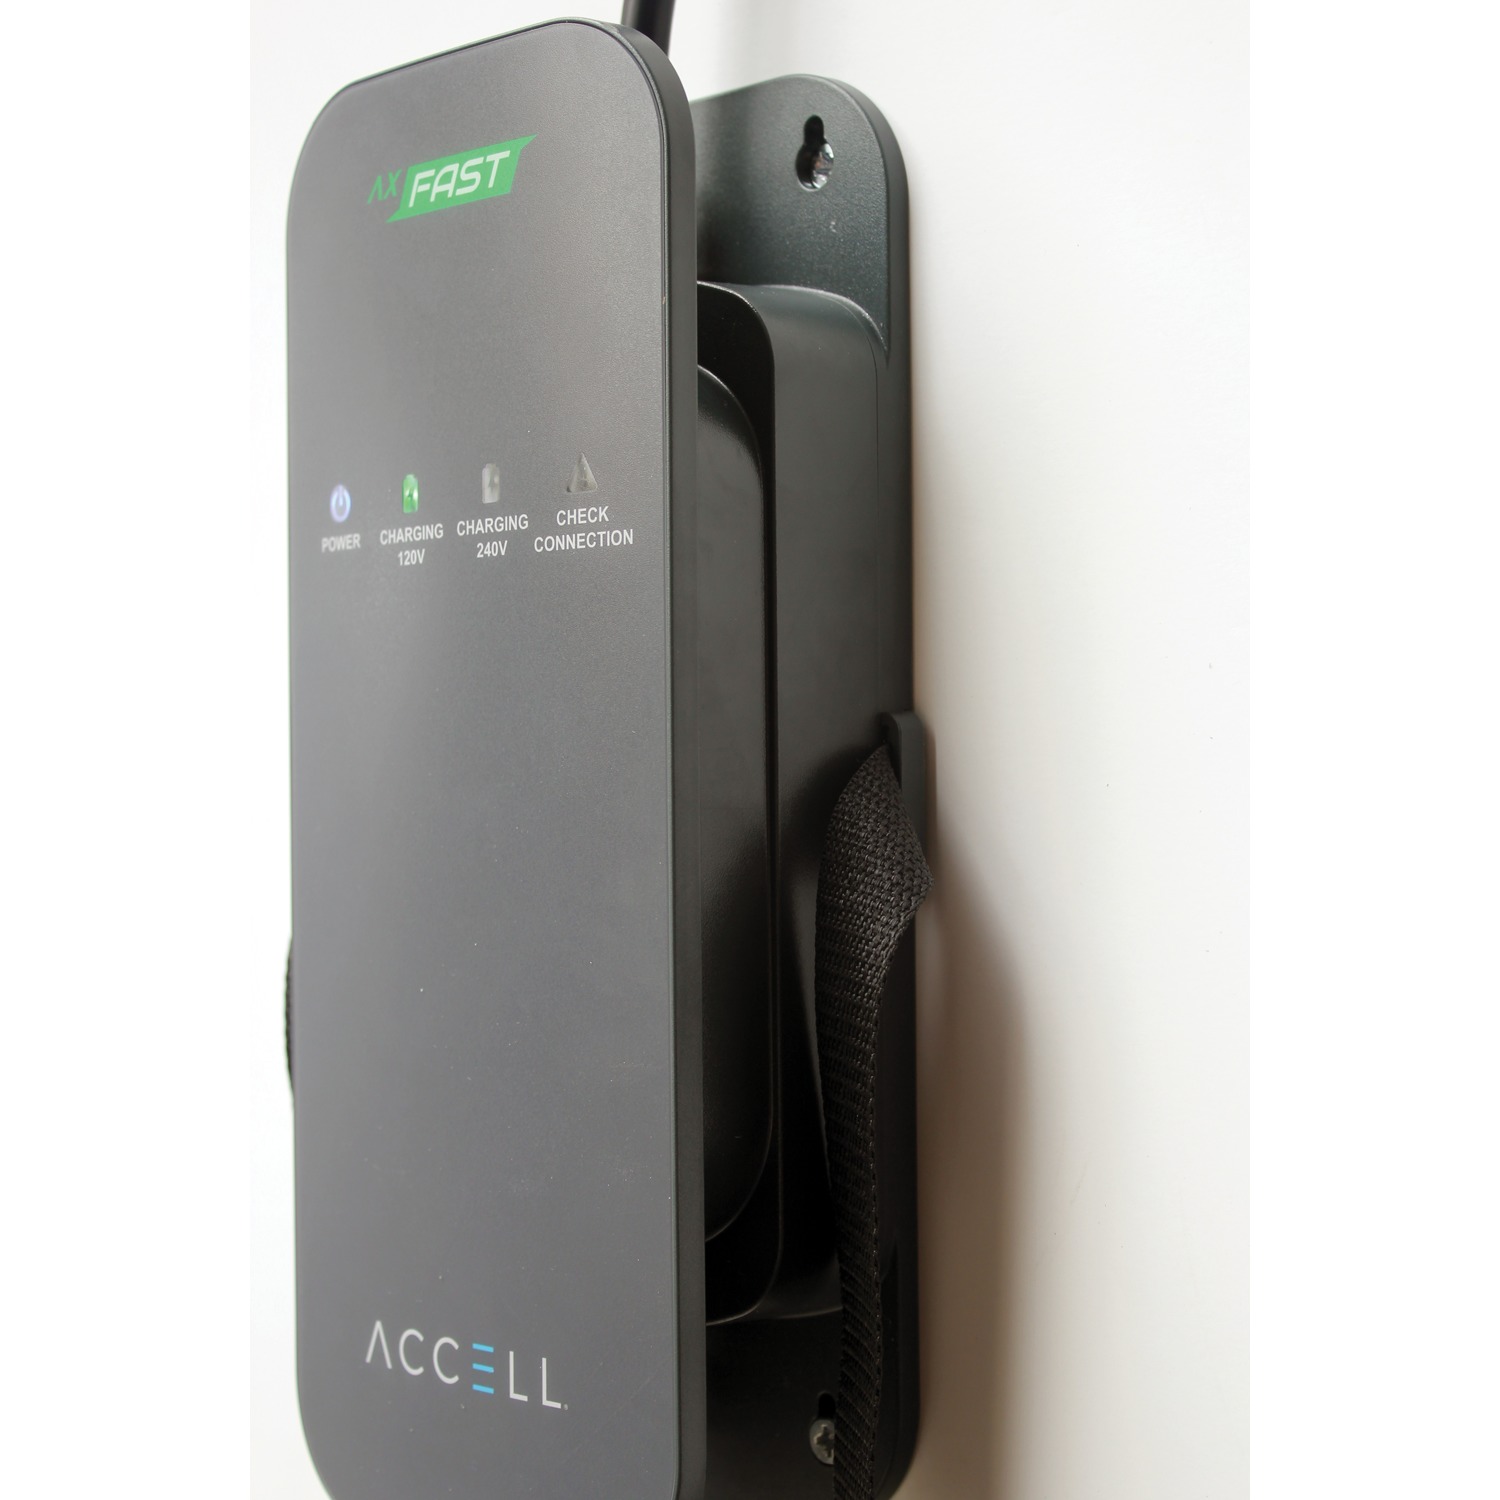 ACCELL P-120240V.USA-001 Dual-Voltage AxFAST Portable Electric Vehicle Charger (EVSE) Level 2 - image 3 of 7